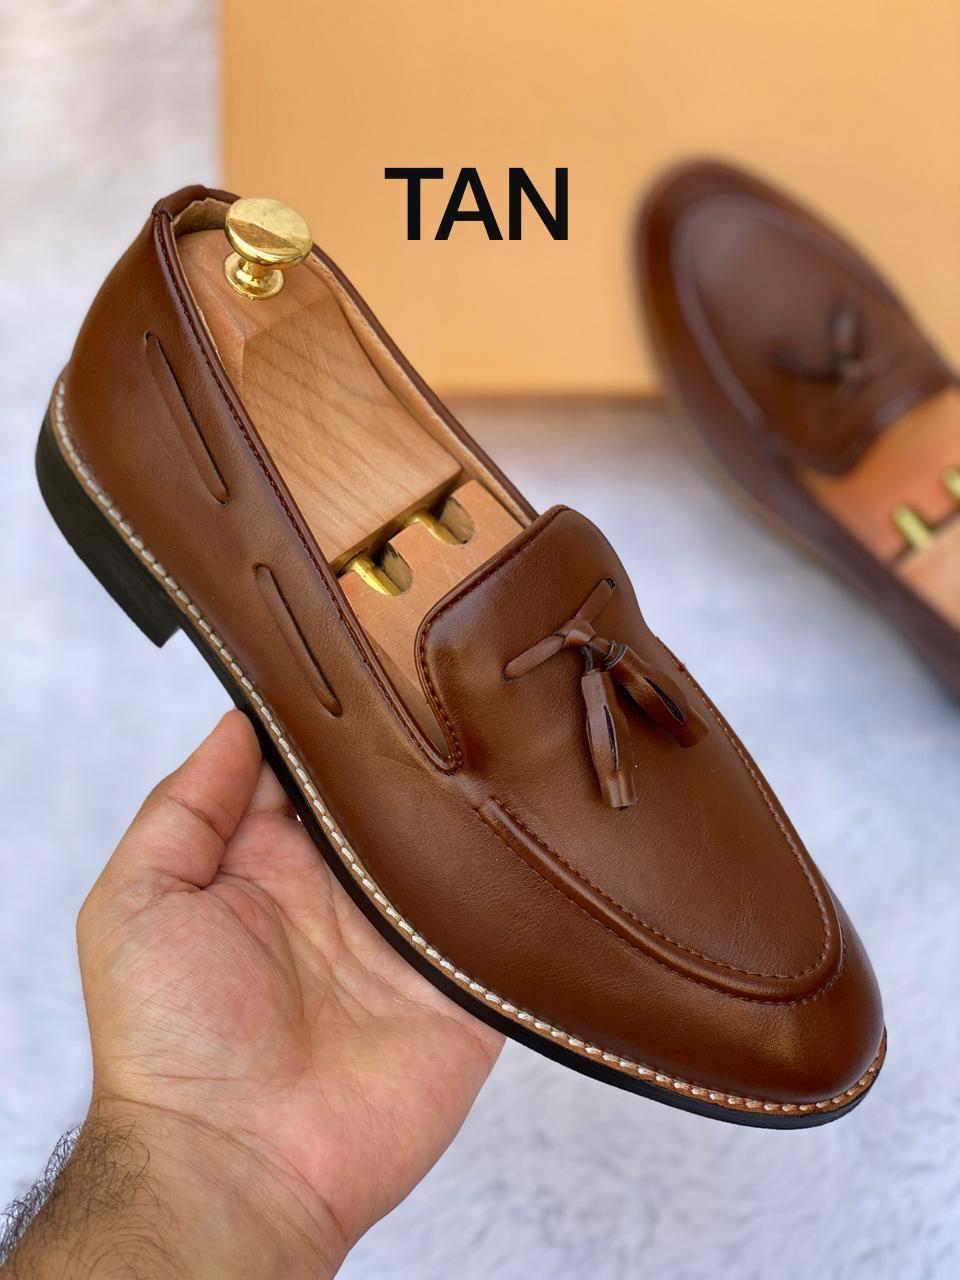 Classic Cool Design Patent Slipons With Tassels For Men-Unique and Classy